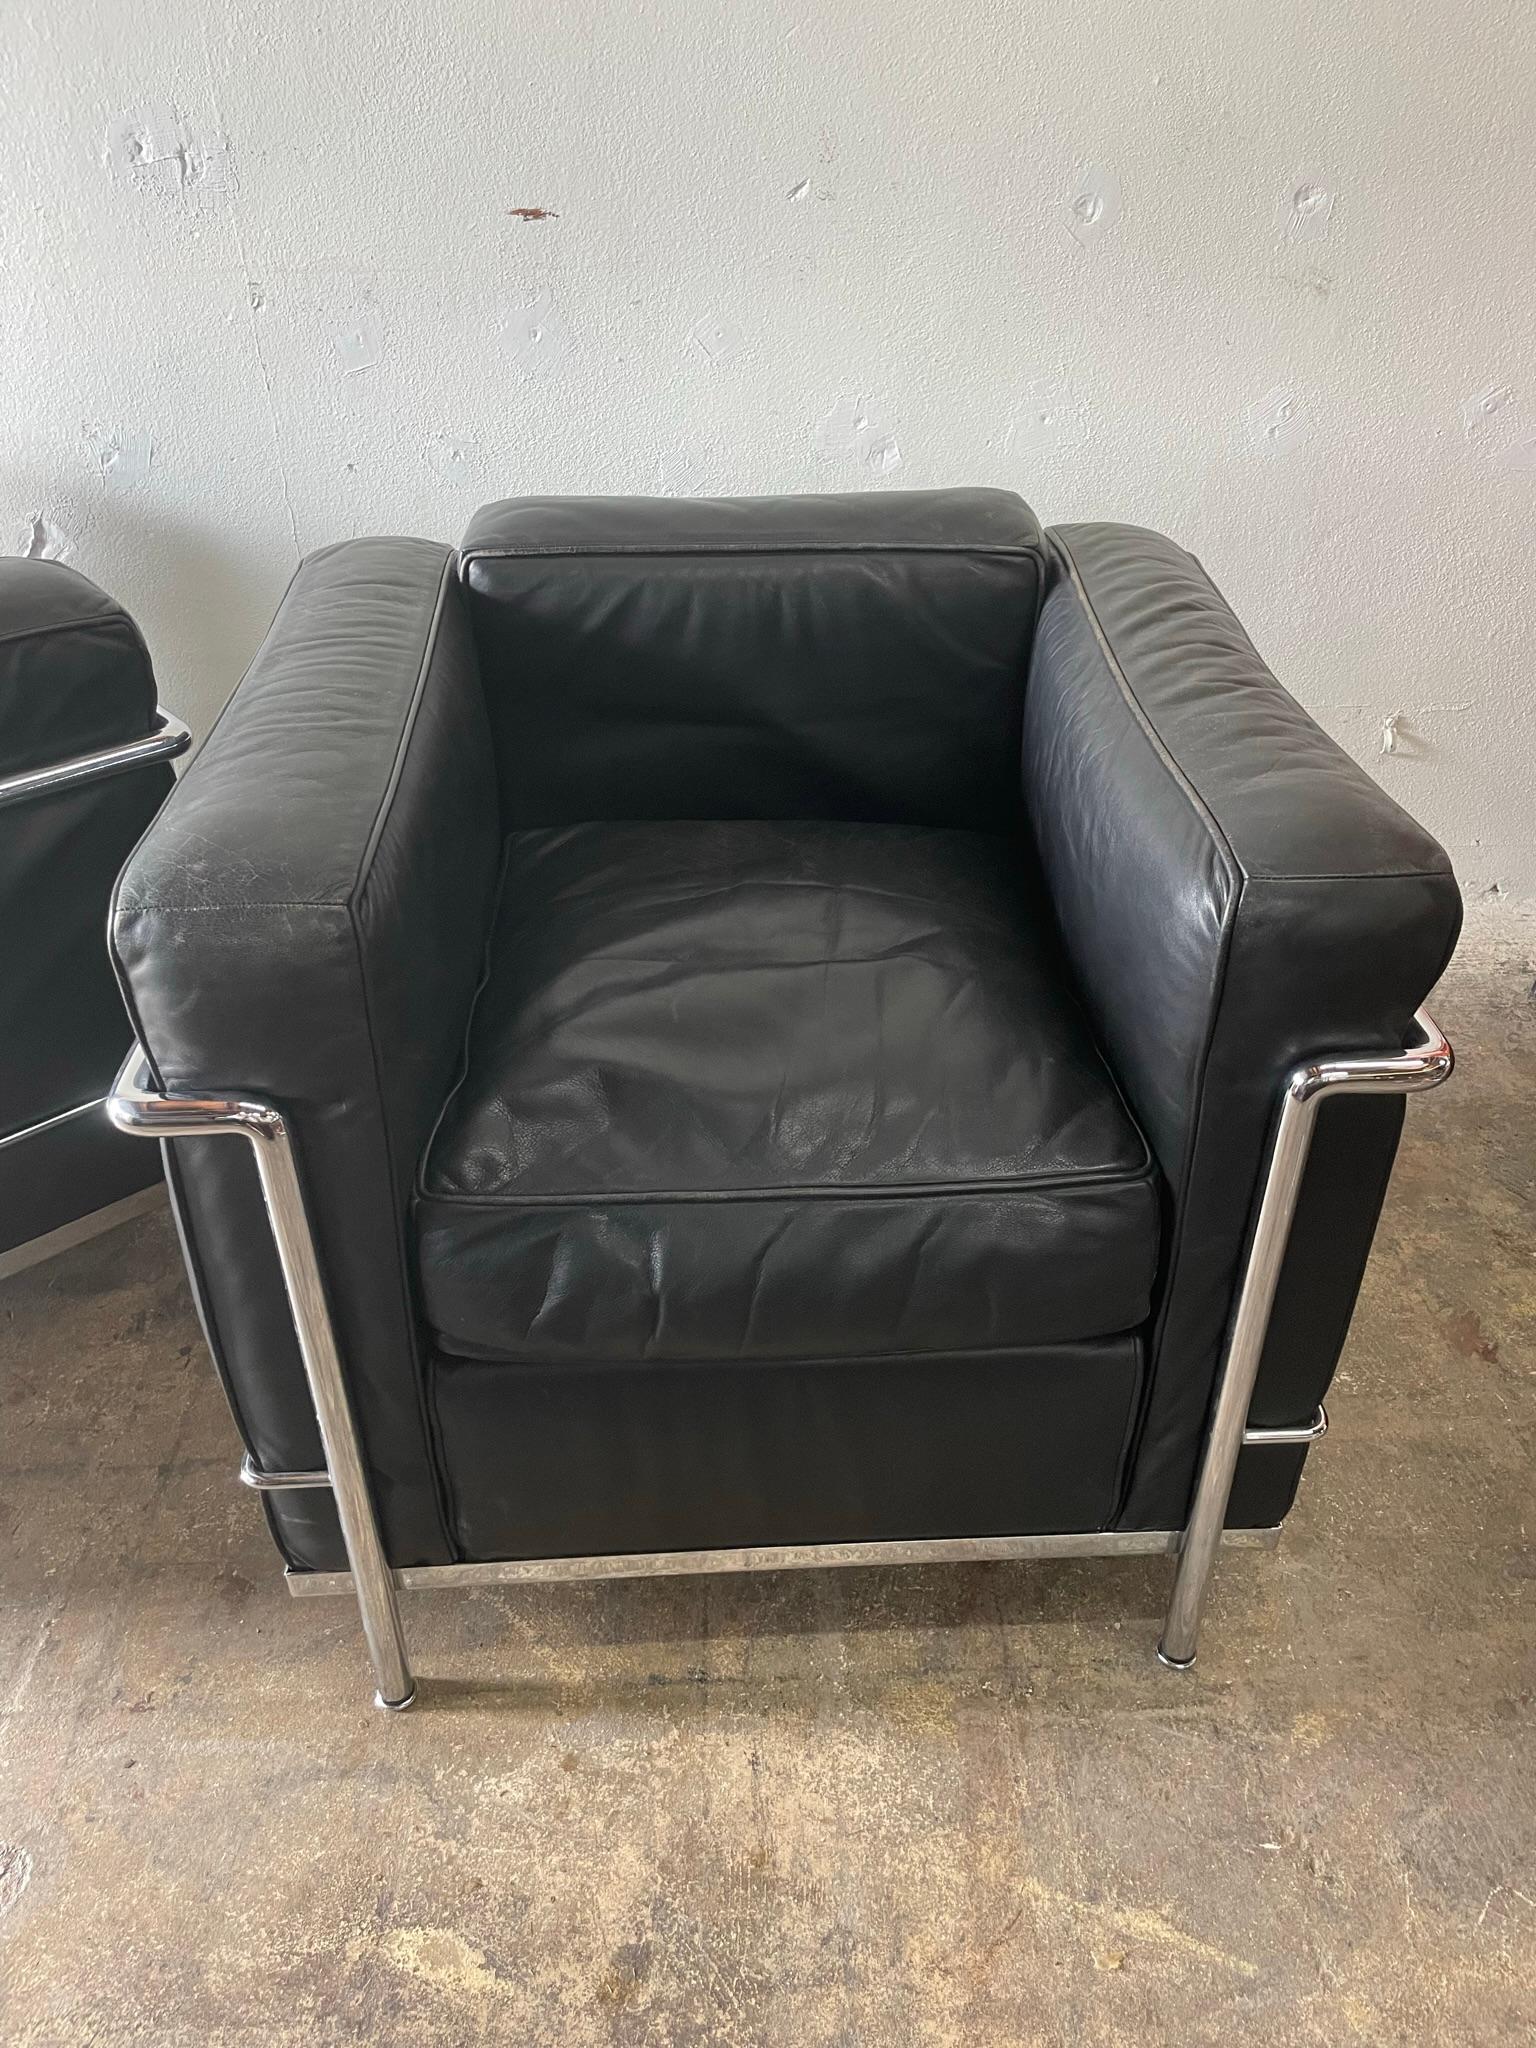 Pair of Authentic club chairs model LC2 in chrome designed by Le Corbusier and Charlotte Perriand and produced by Cassina.
Black leather. Stamped. Some patina on leather.